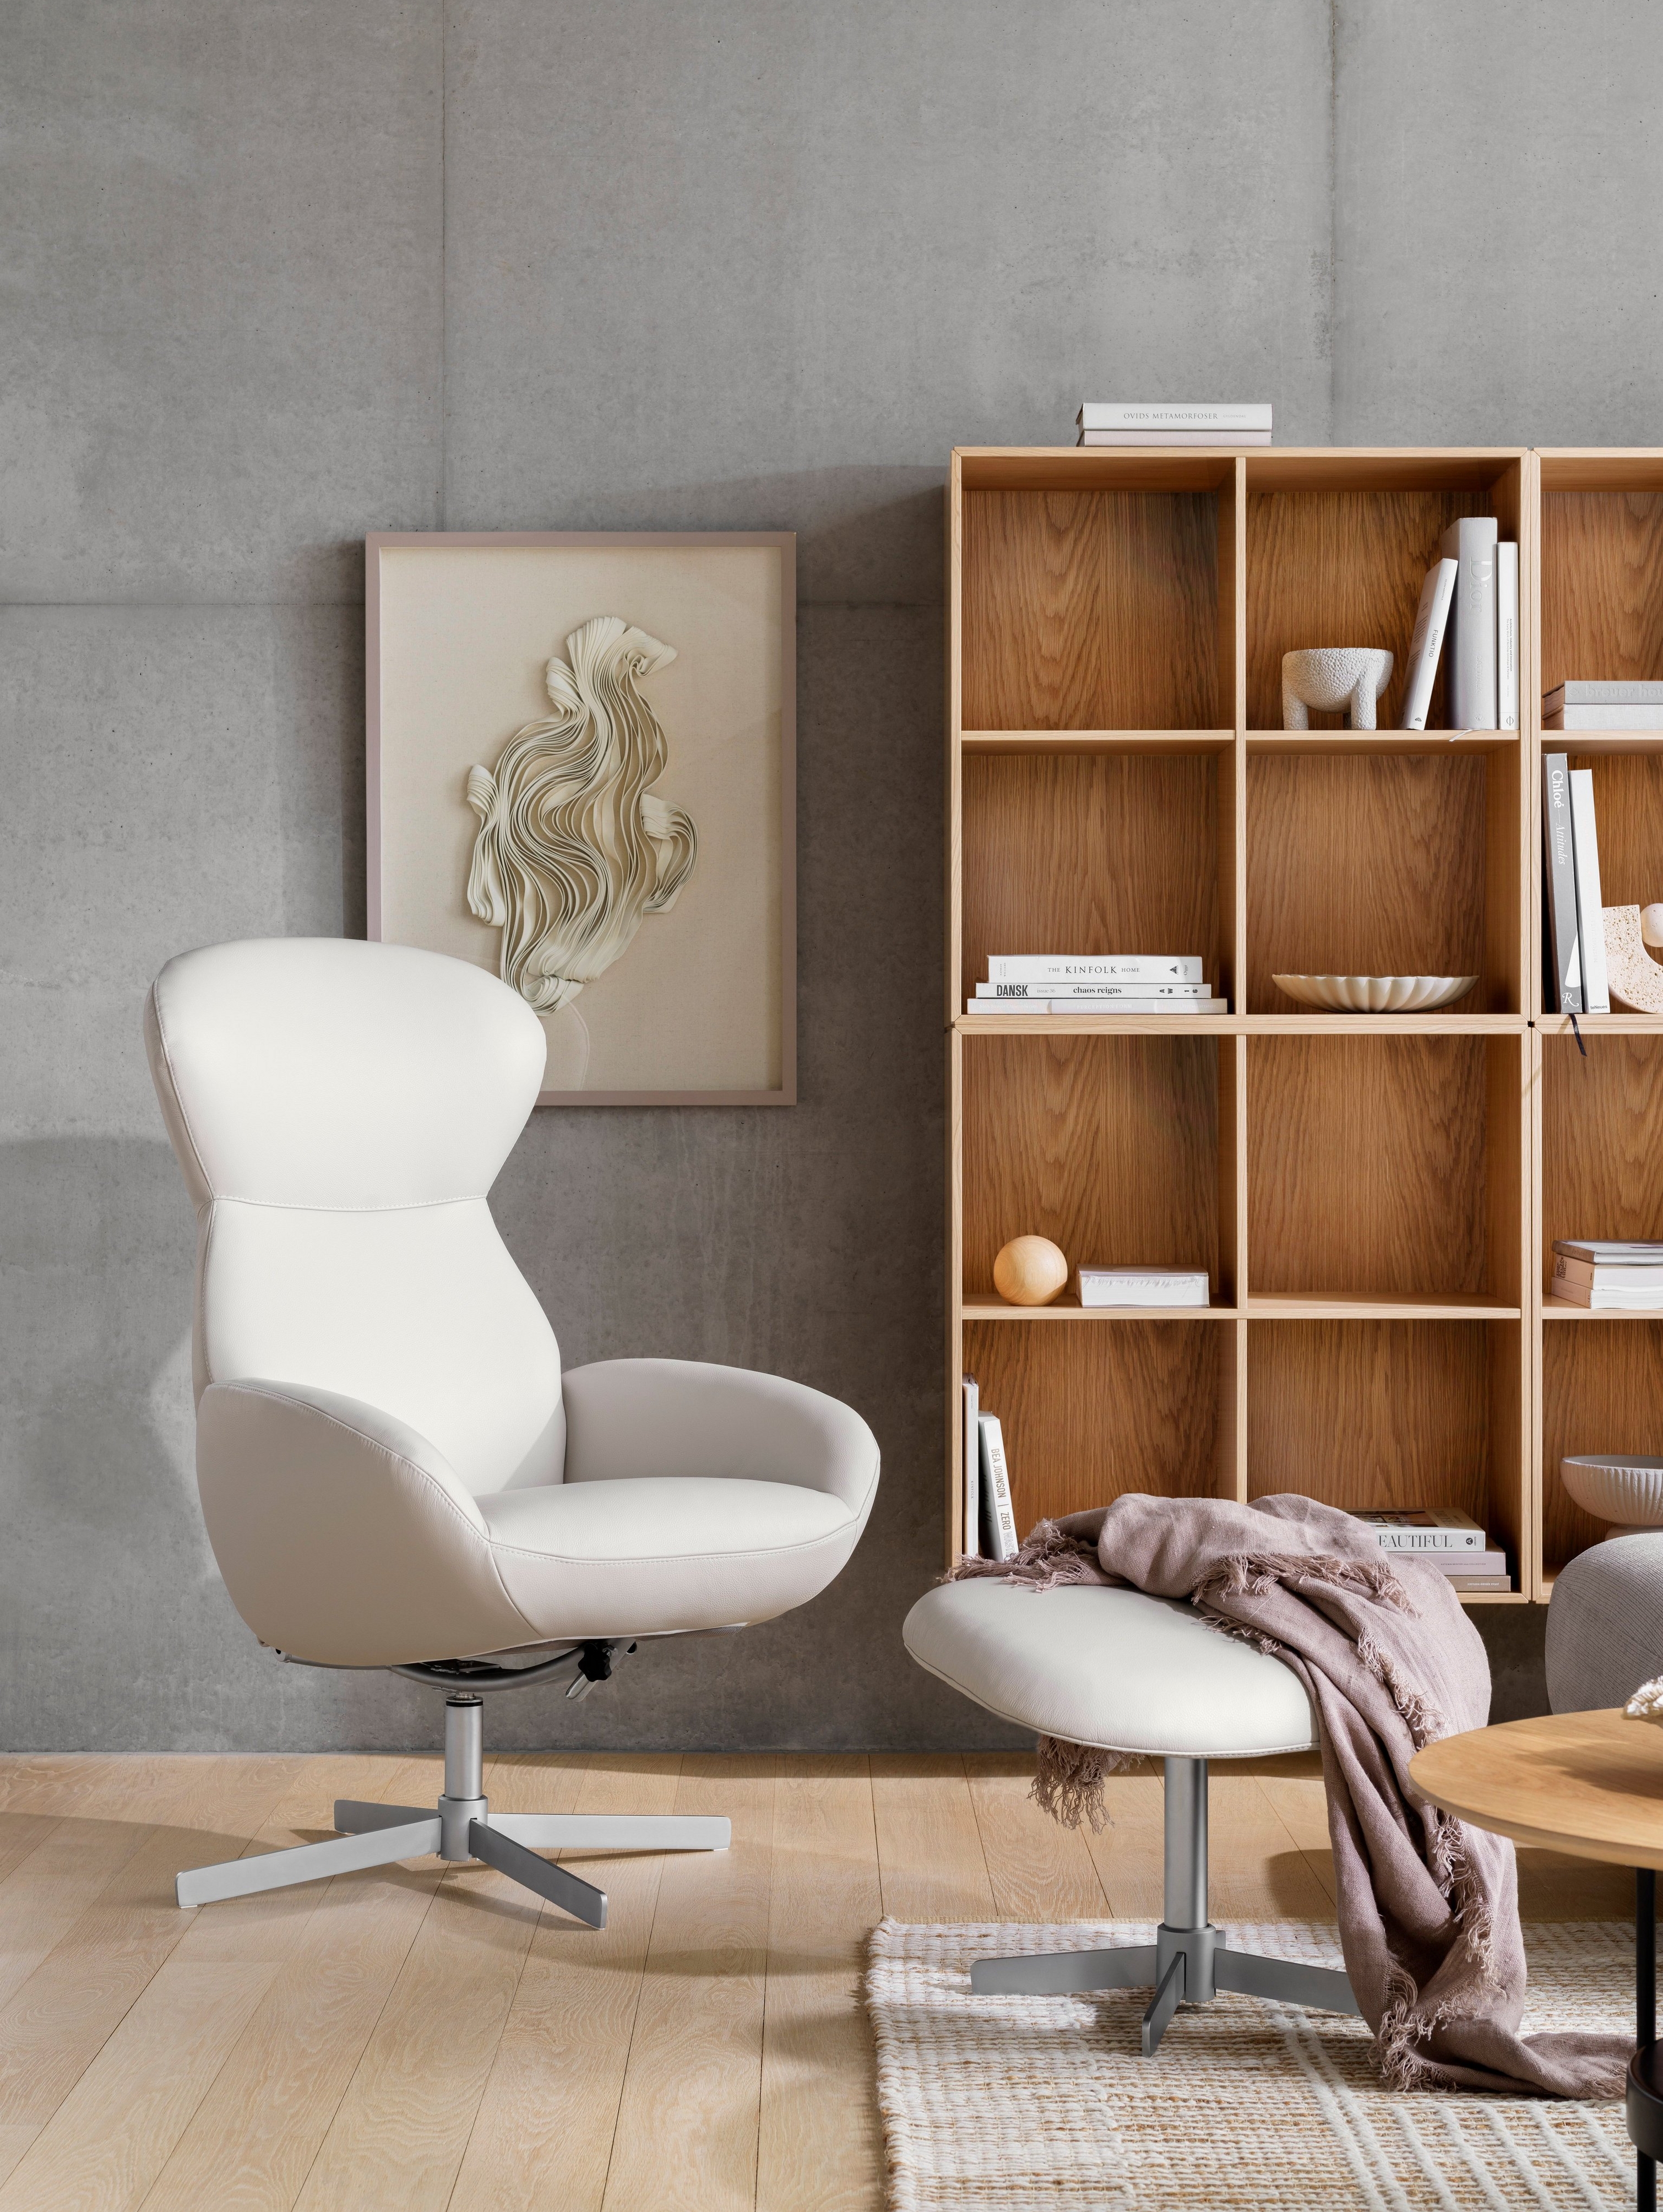 White Athena recliner chair with footrest and wooden Como bookshelf in a cozy room